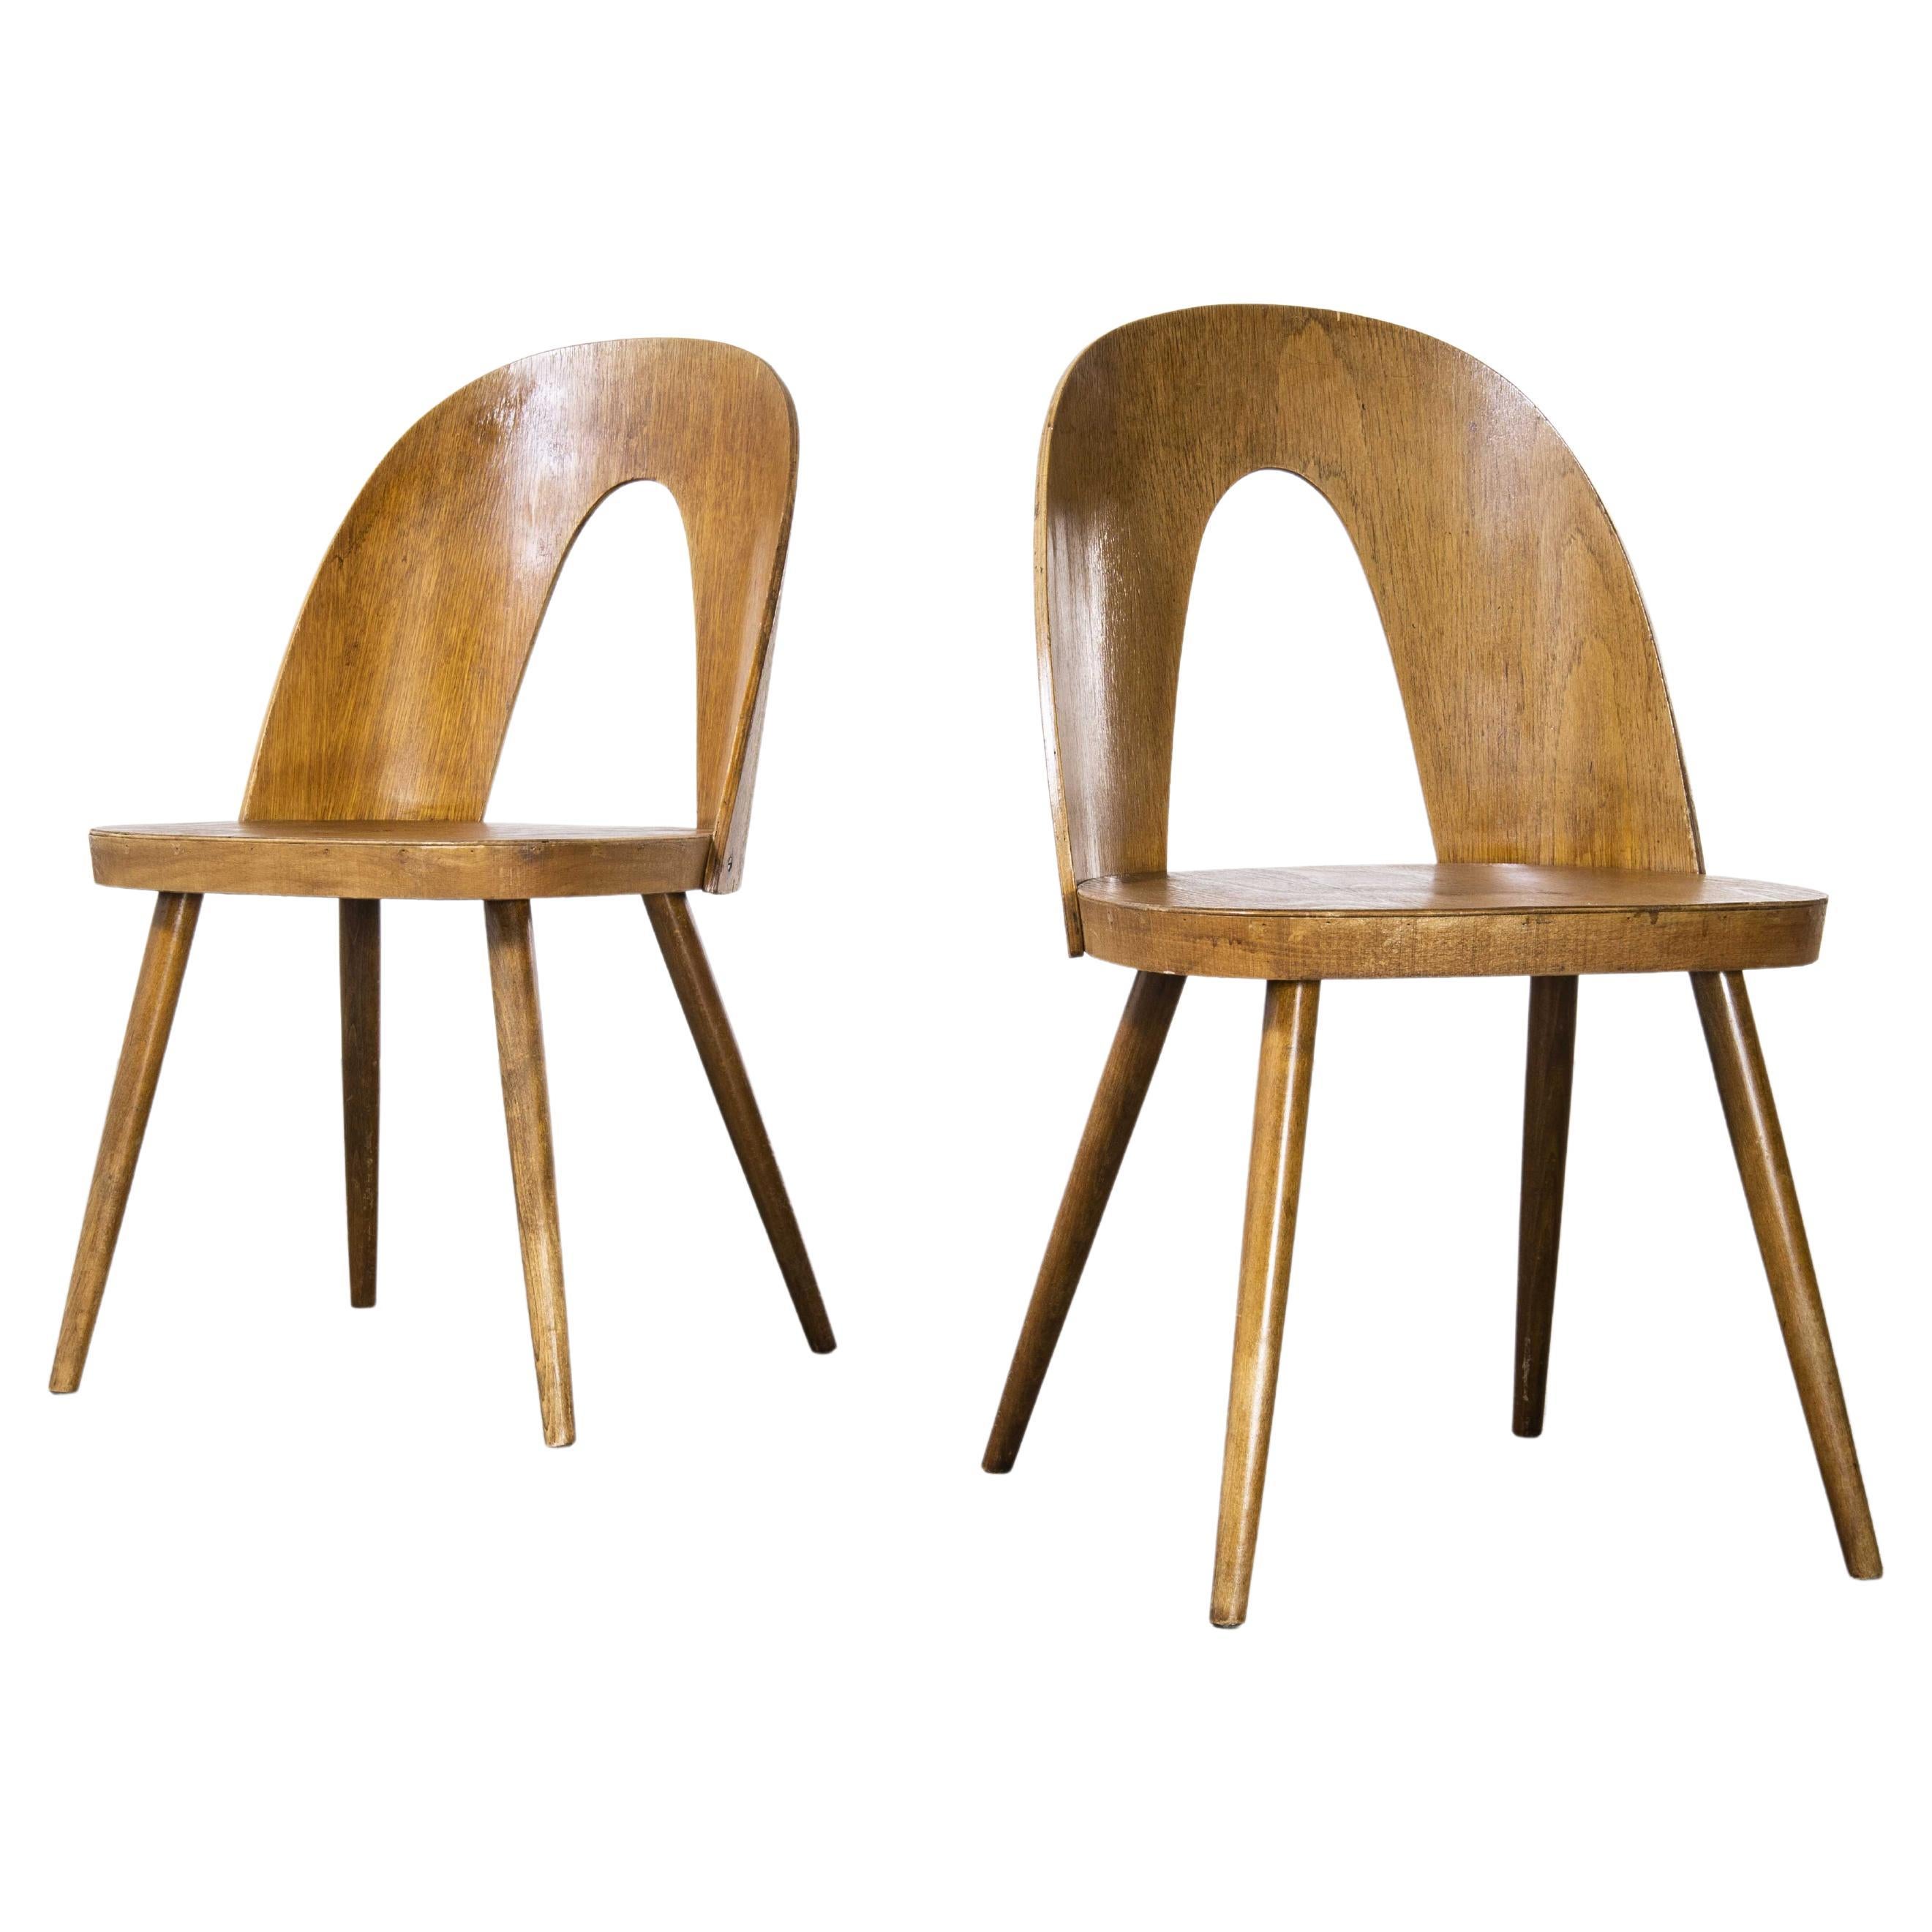 1960s Side, Dining Chairs by Antonin Suman for Ton, Pair